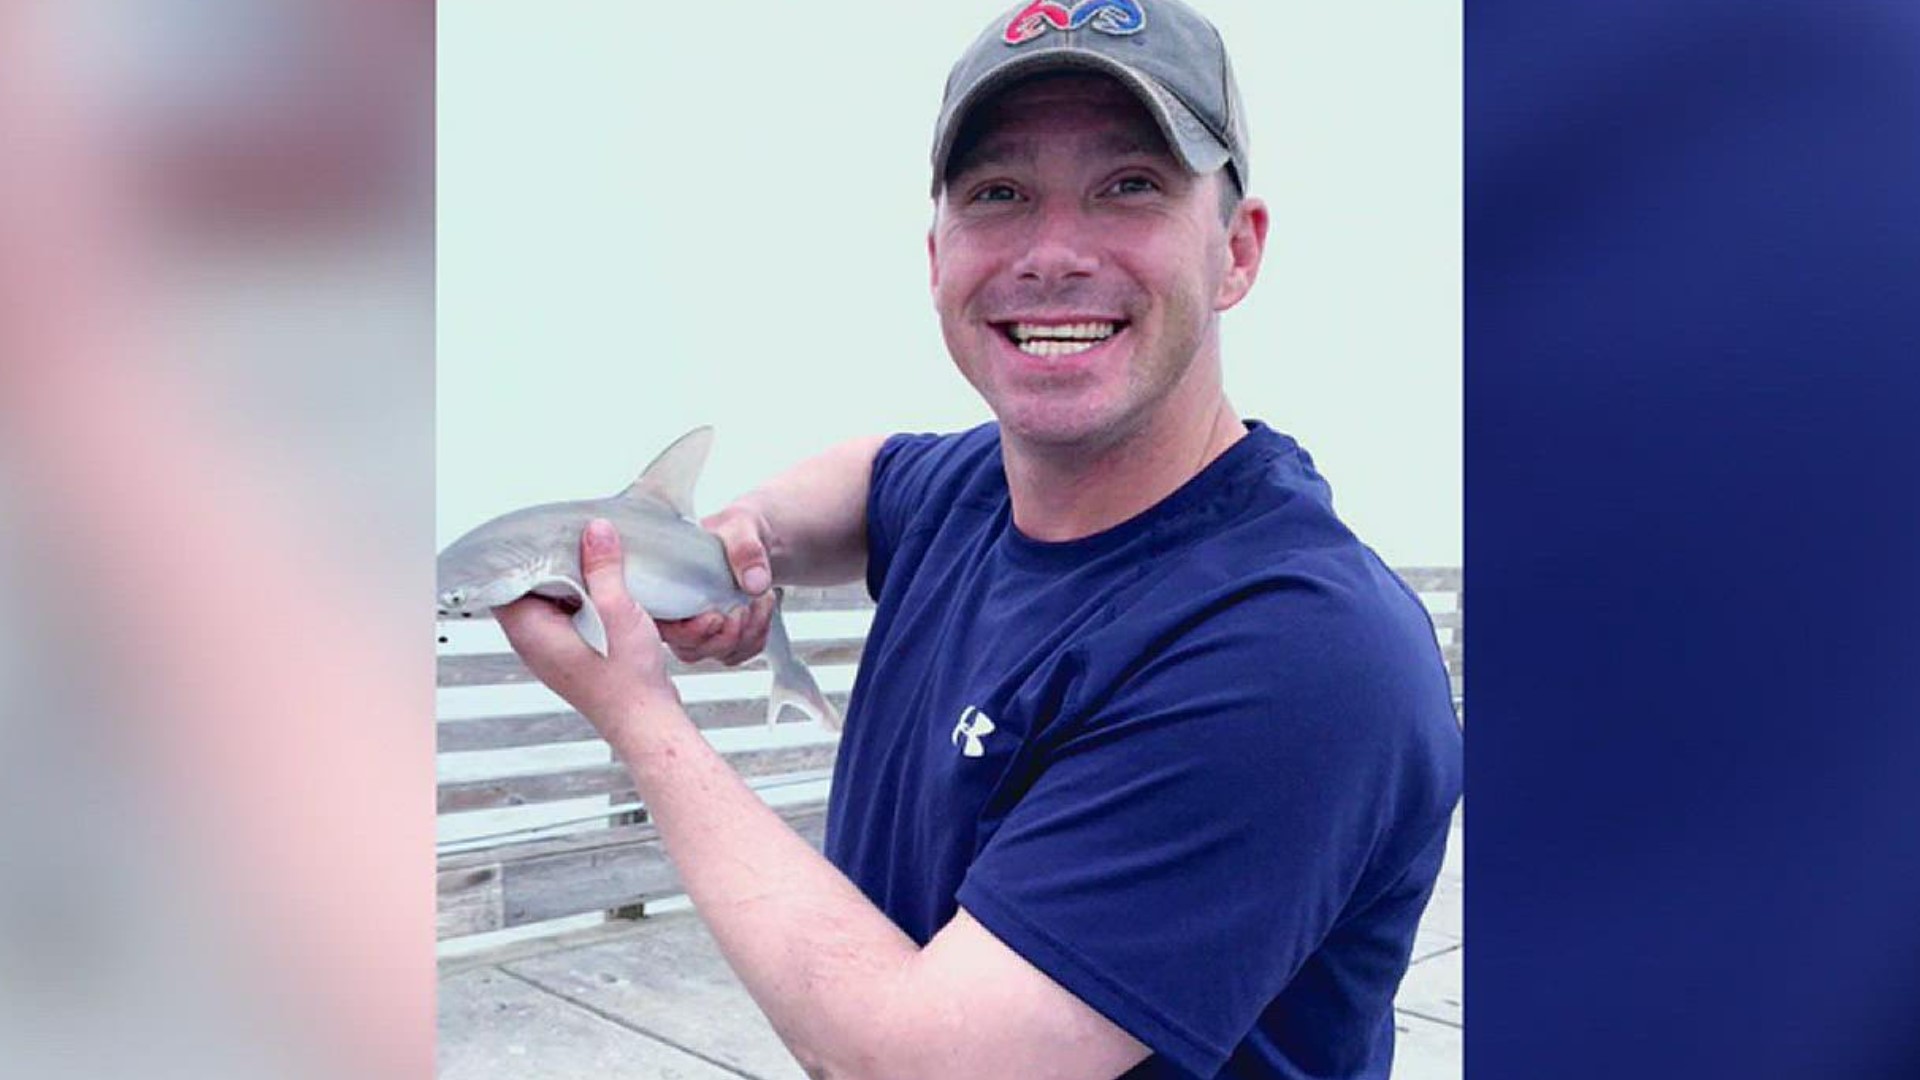 Bradley Brooks was last seen at his Flour Bluff home in August 2019. He left to go fishing one night and was never seen again.